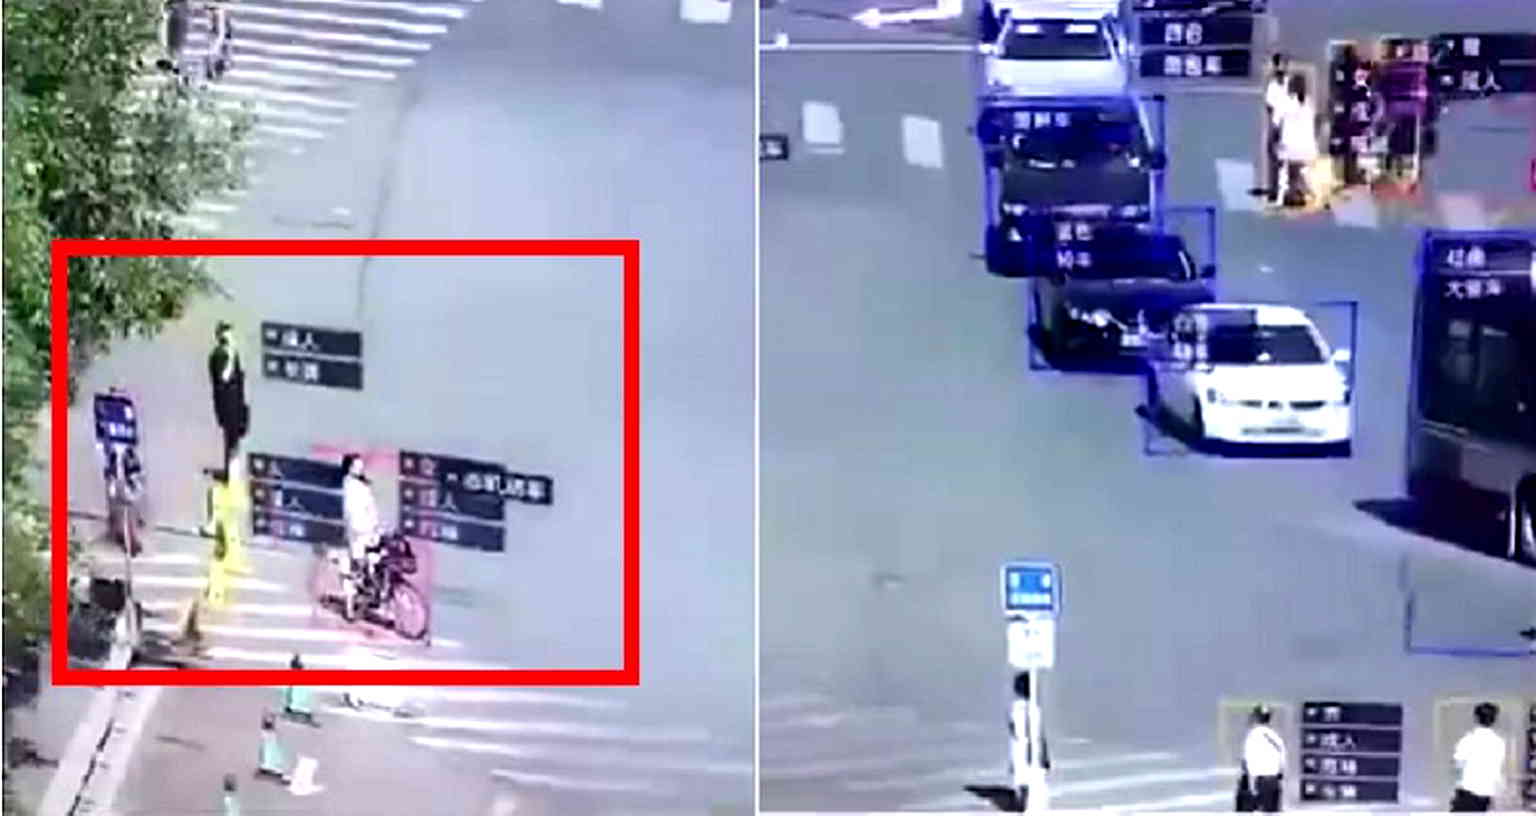 China Installs 20 Million of the ‘World’s Most Advanced’ AI Surveillance Cameras to Track People